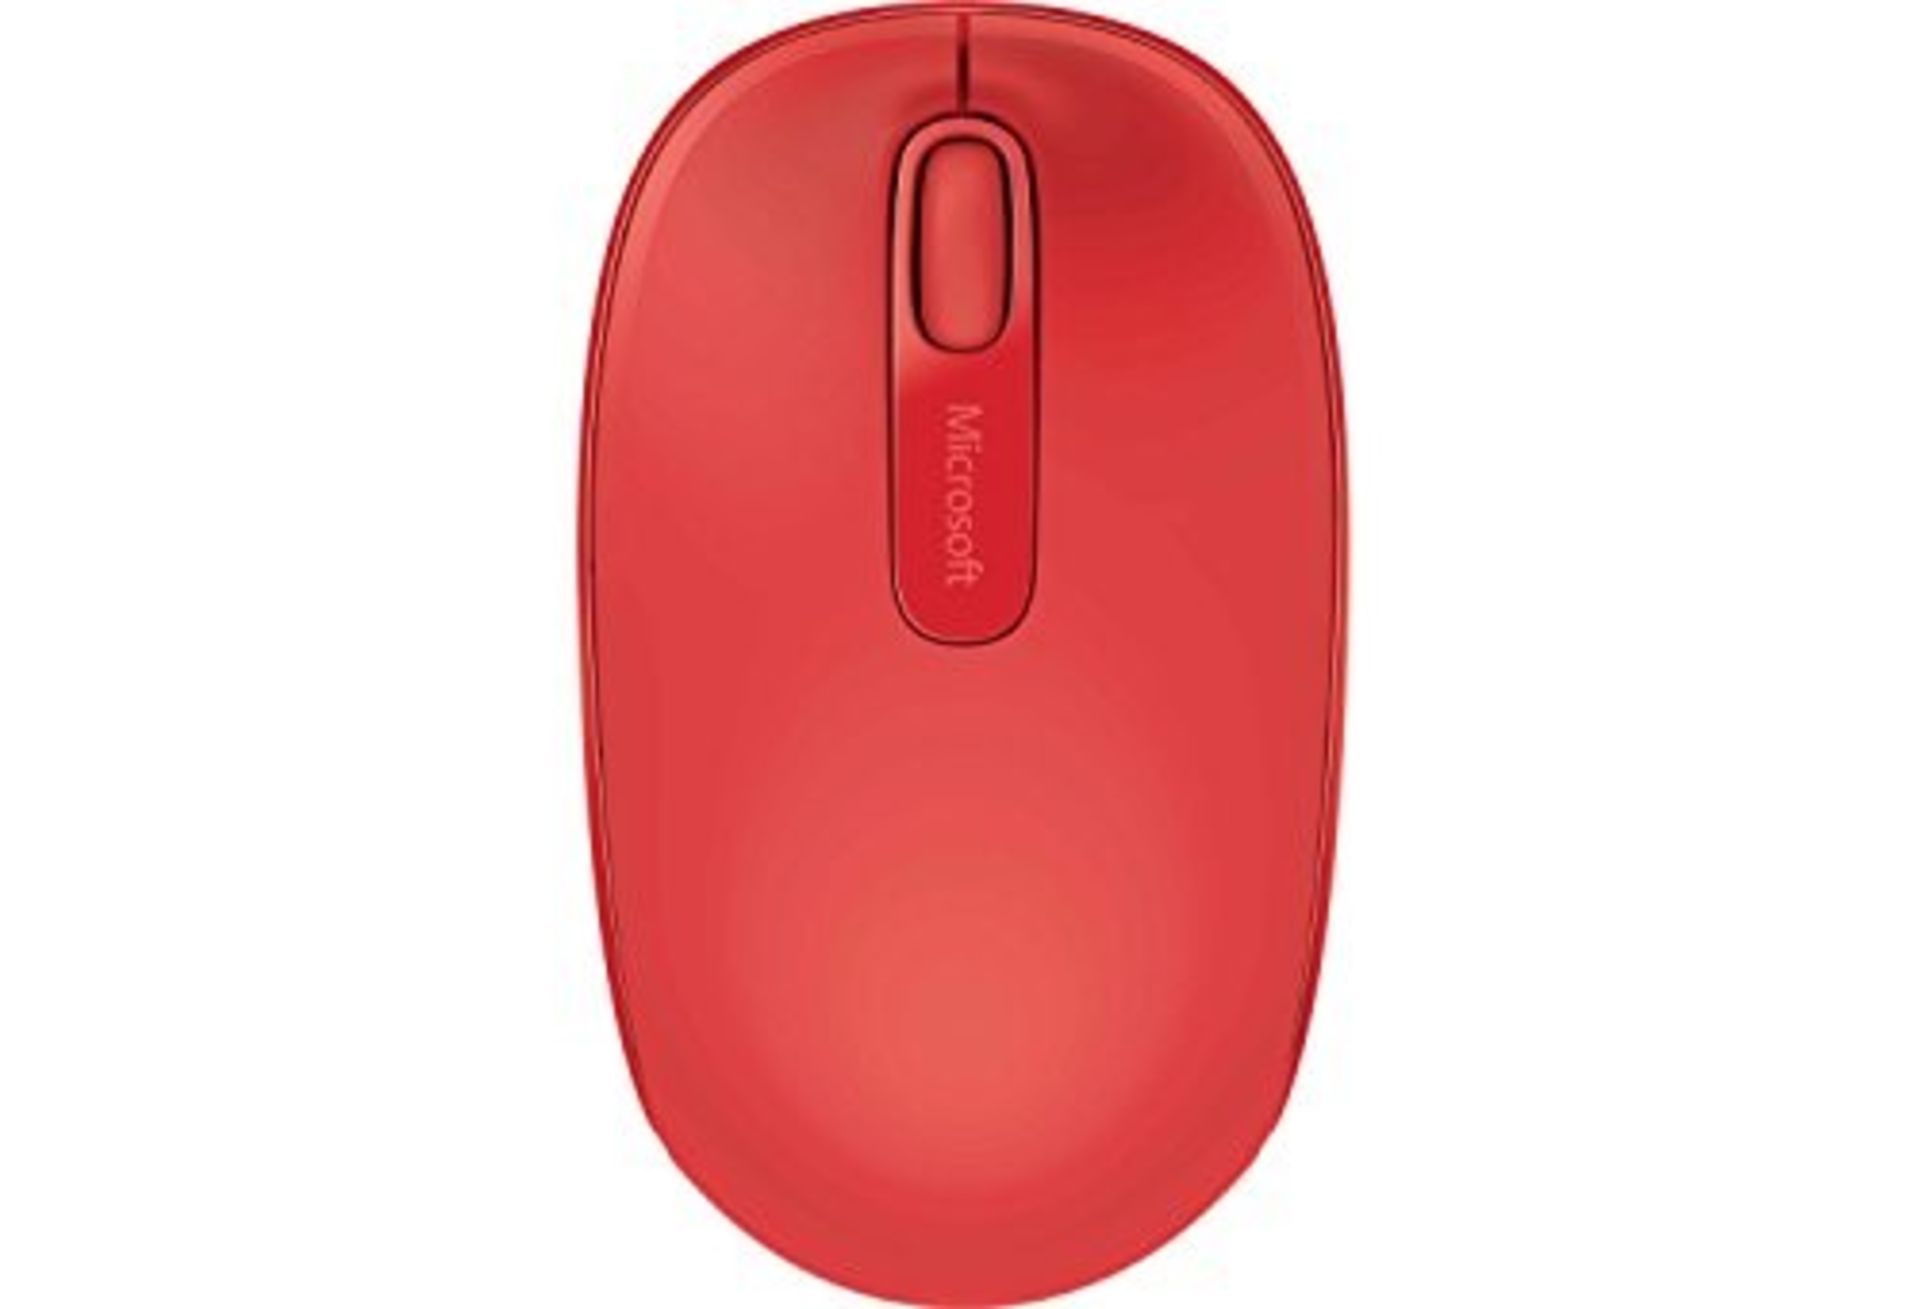 Microsoft 1850 3 Button Wireless Mobile Mouse - Flame Red - Image 4 of 4